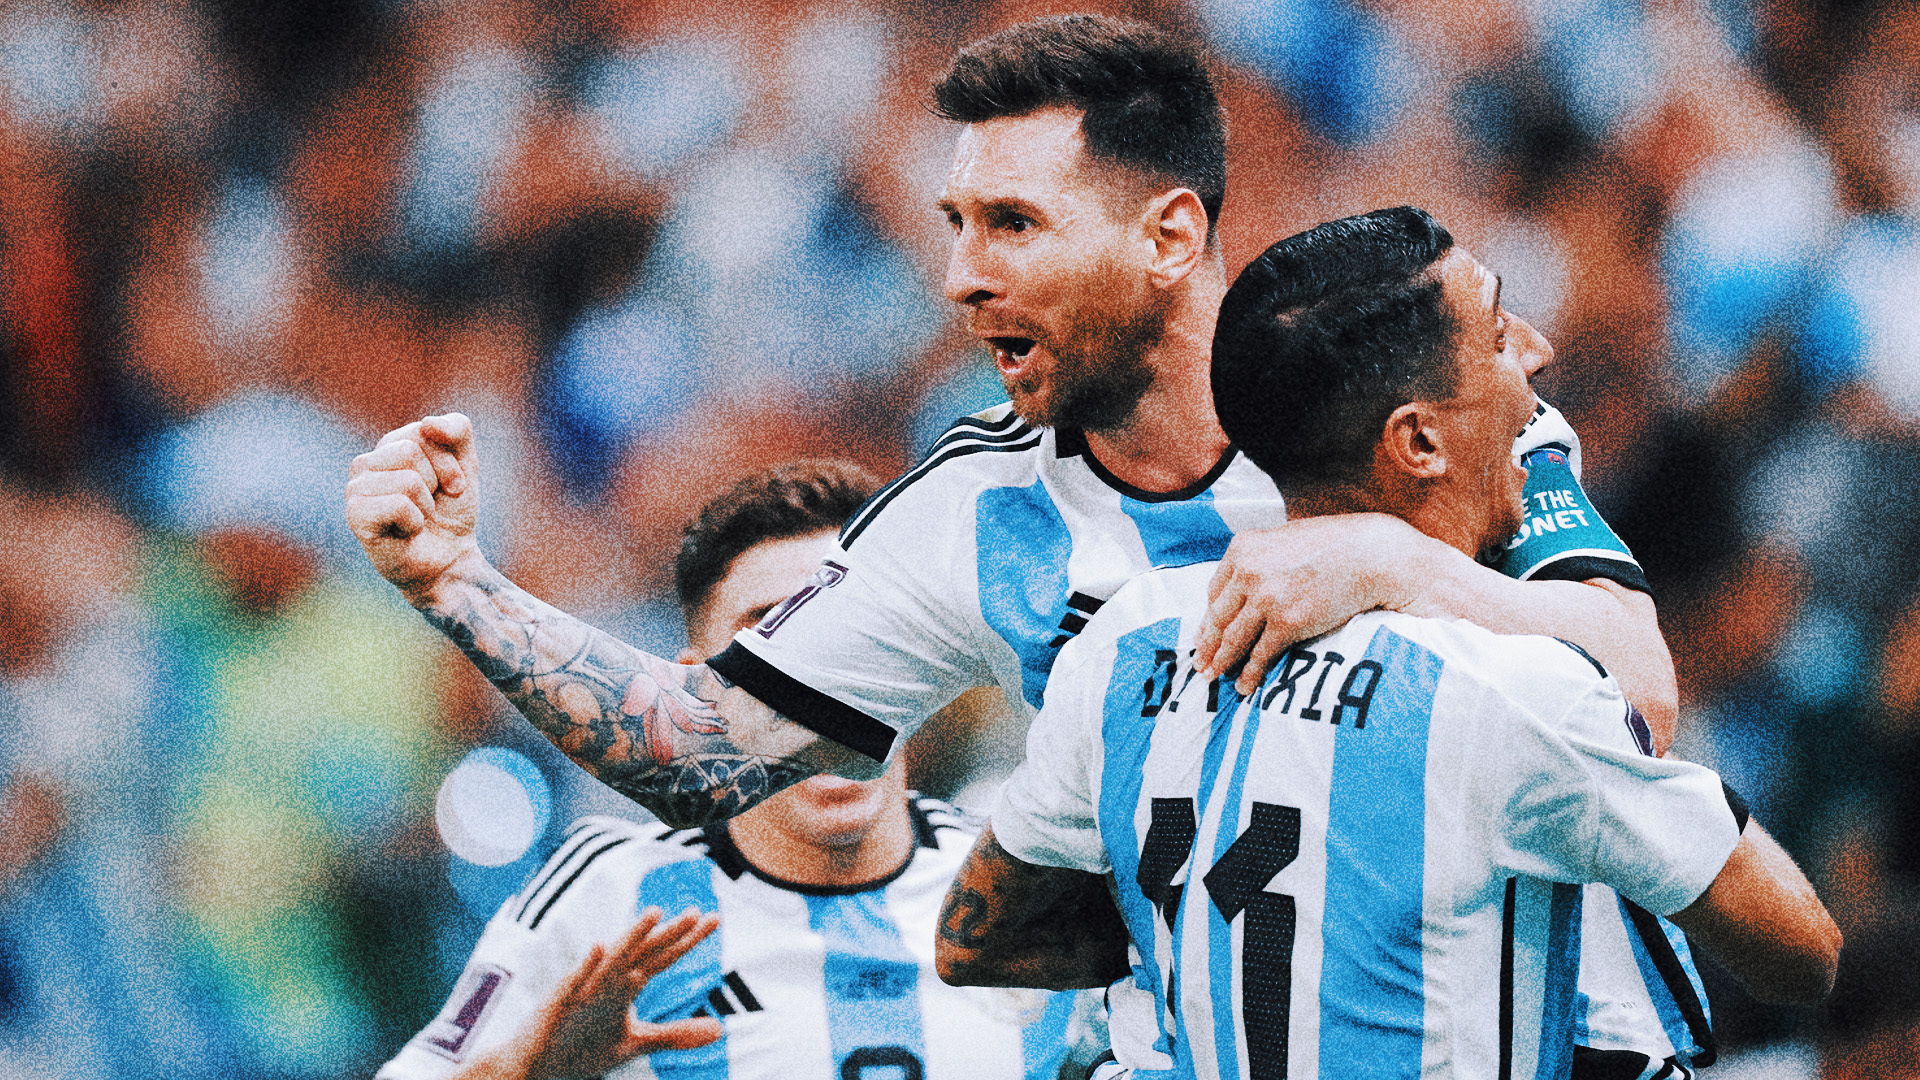 World Cup 2022: Argentina - Mexico: Game time and where to watch